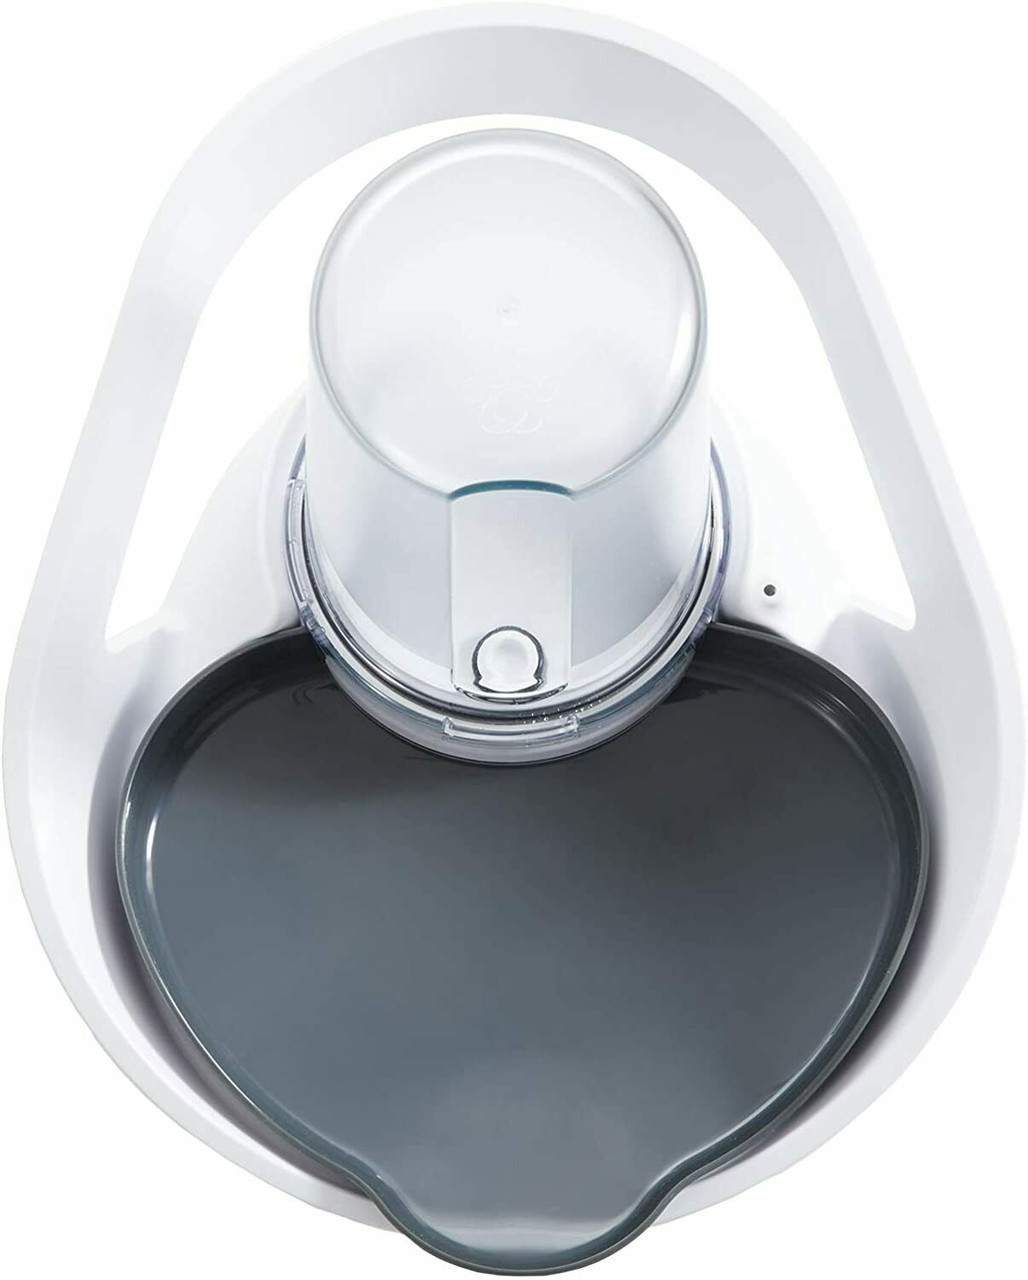 Felaqua Connect Cat Water Fountain Review: Tracks Cat's Drinking